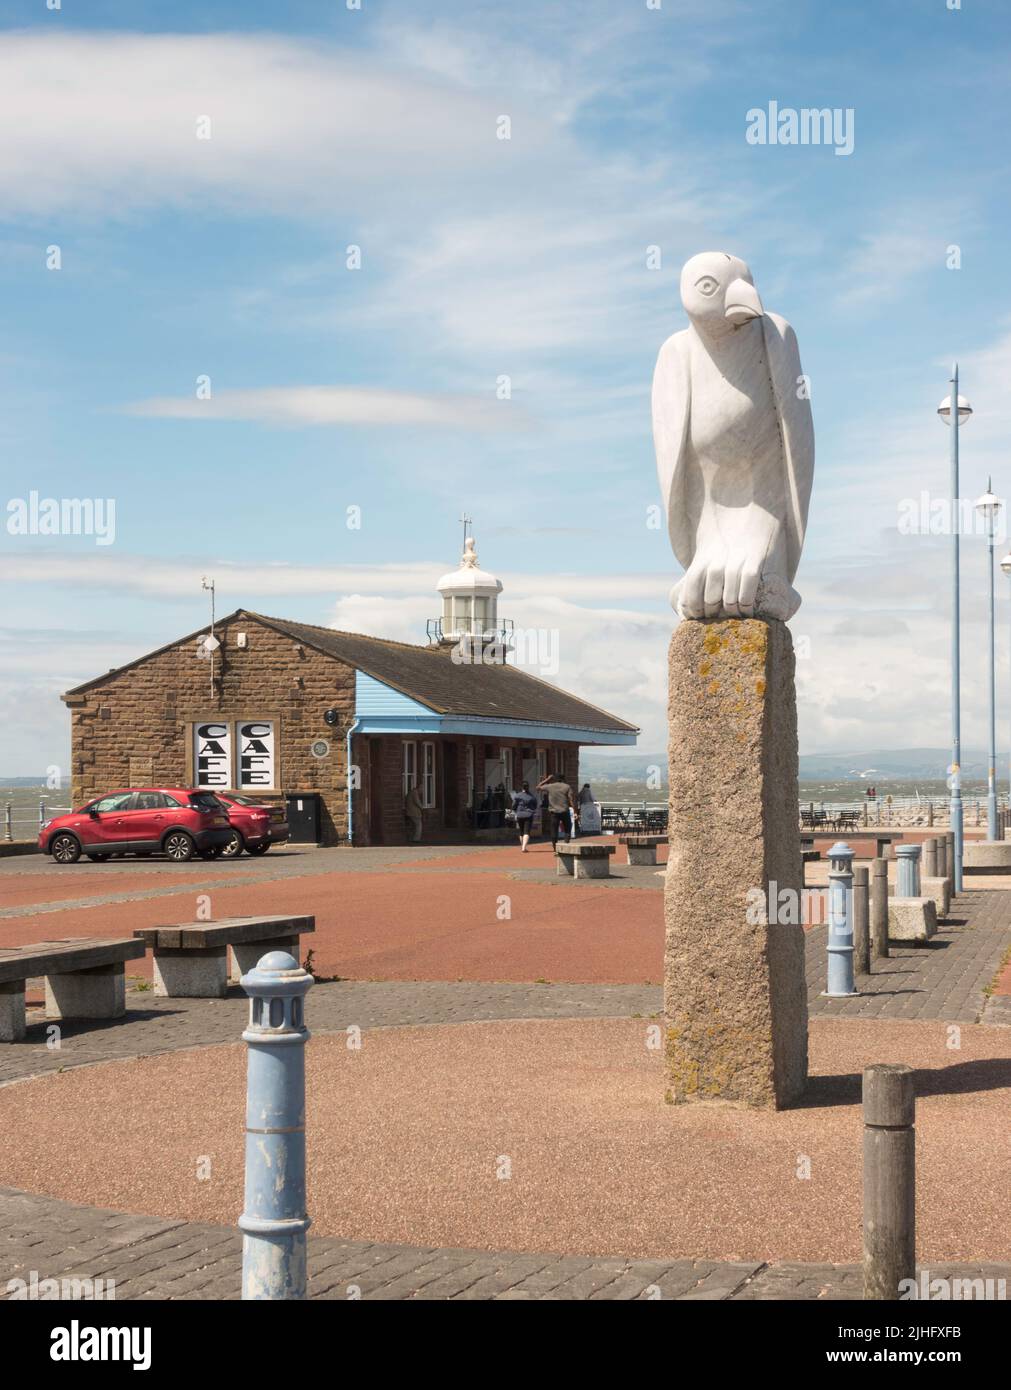 The Mythical Bird sculpture and The Stone Jetty café on Morecambe pier in Lancaster, England, UK Stock Photo